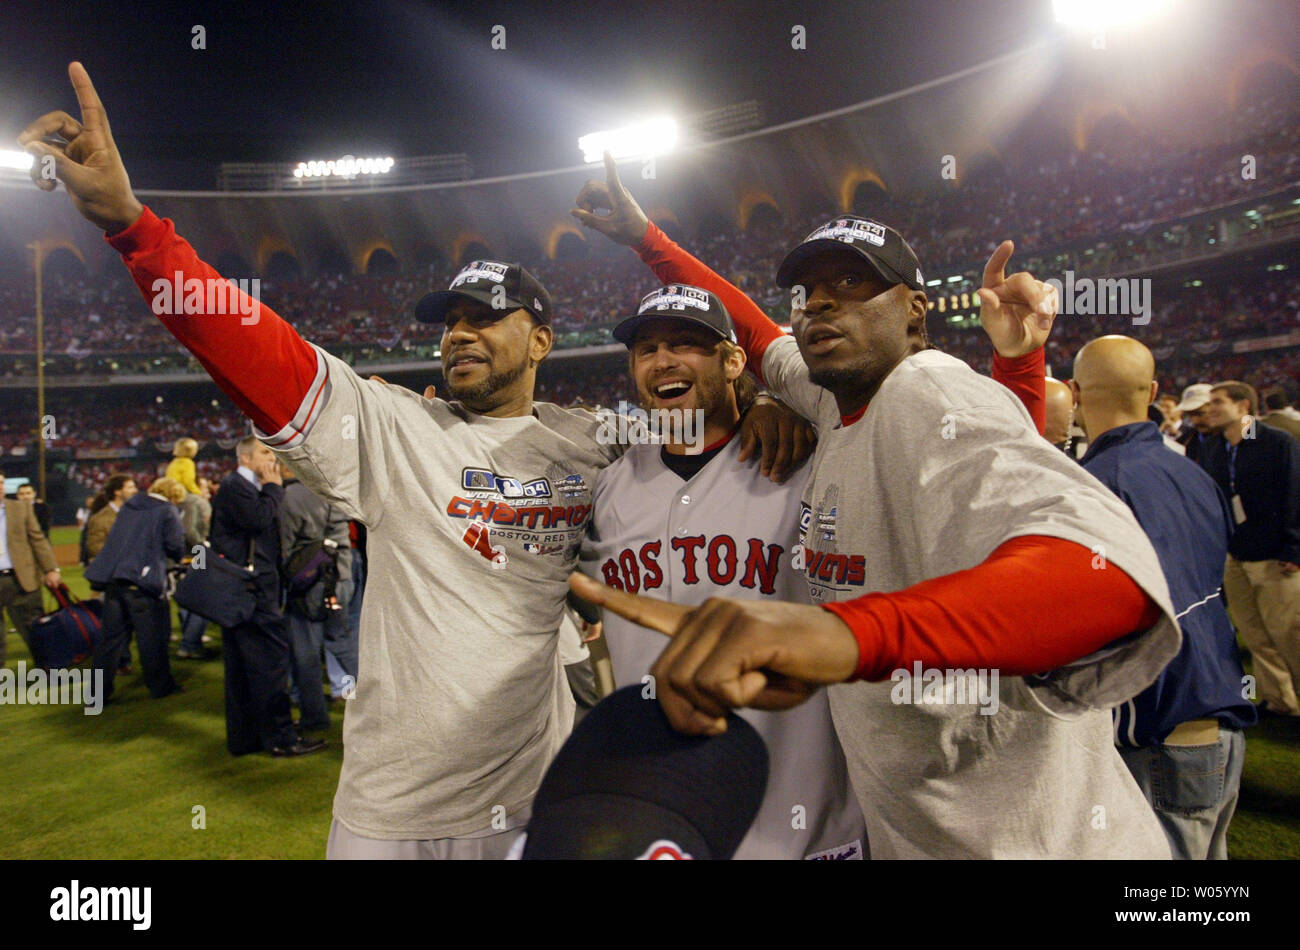 Today in photo history - 2004: Red Sox win first World Series since 1918